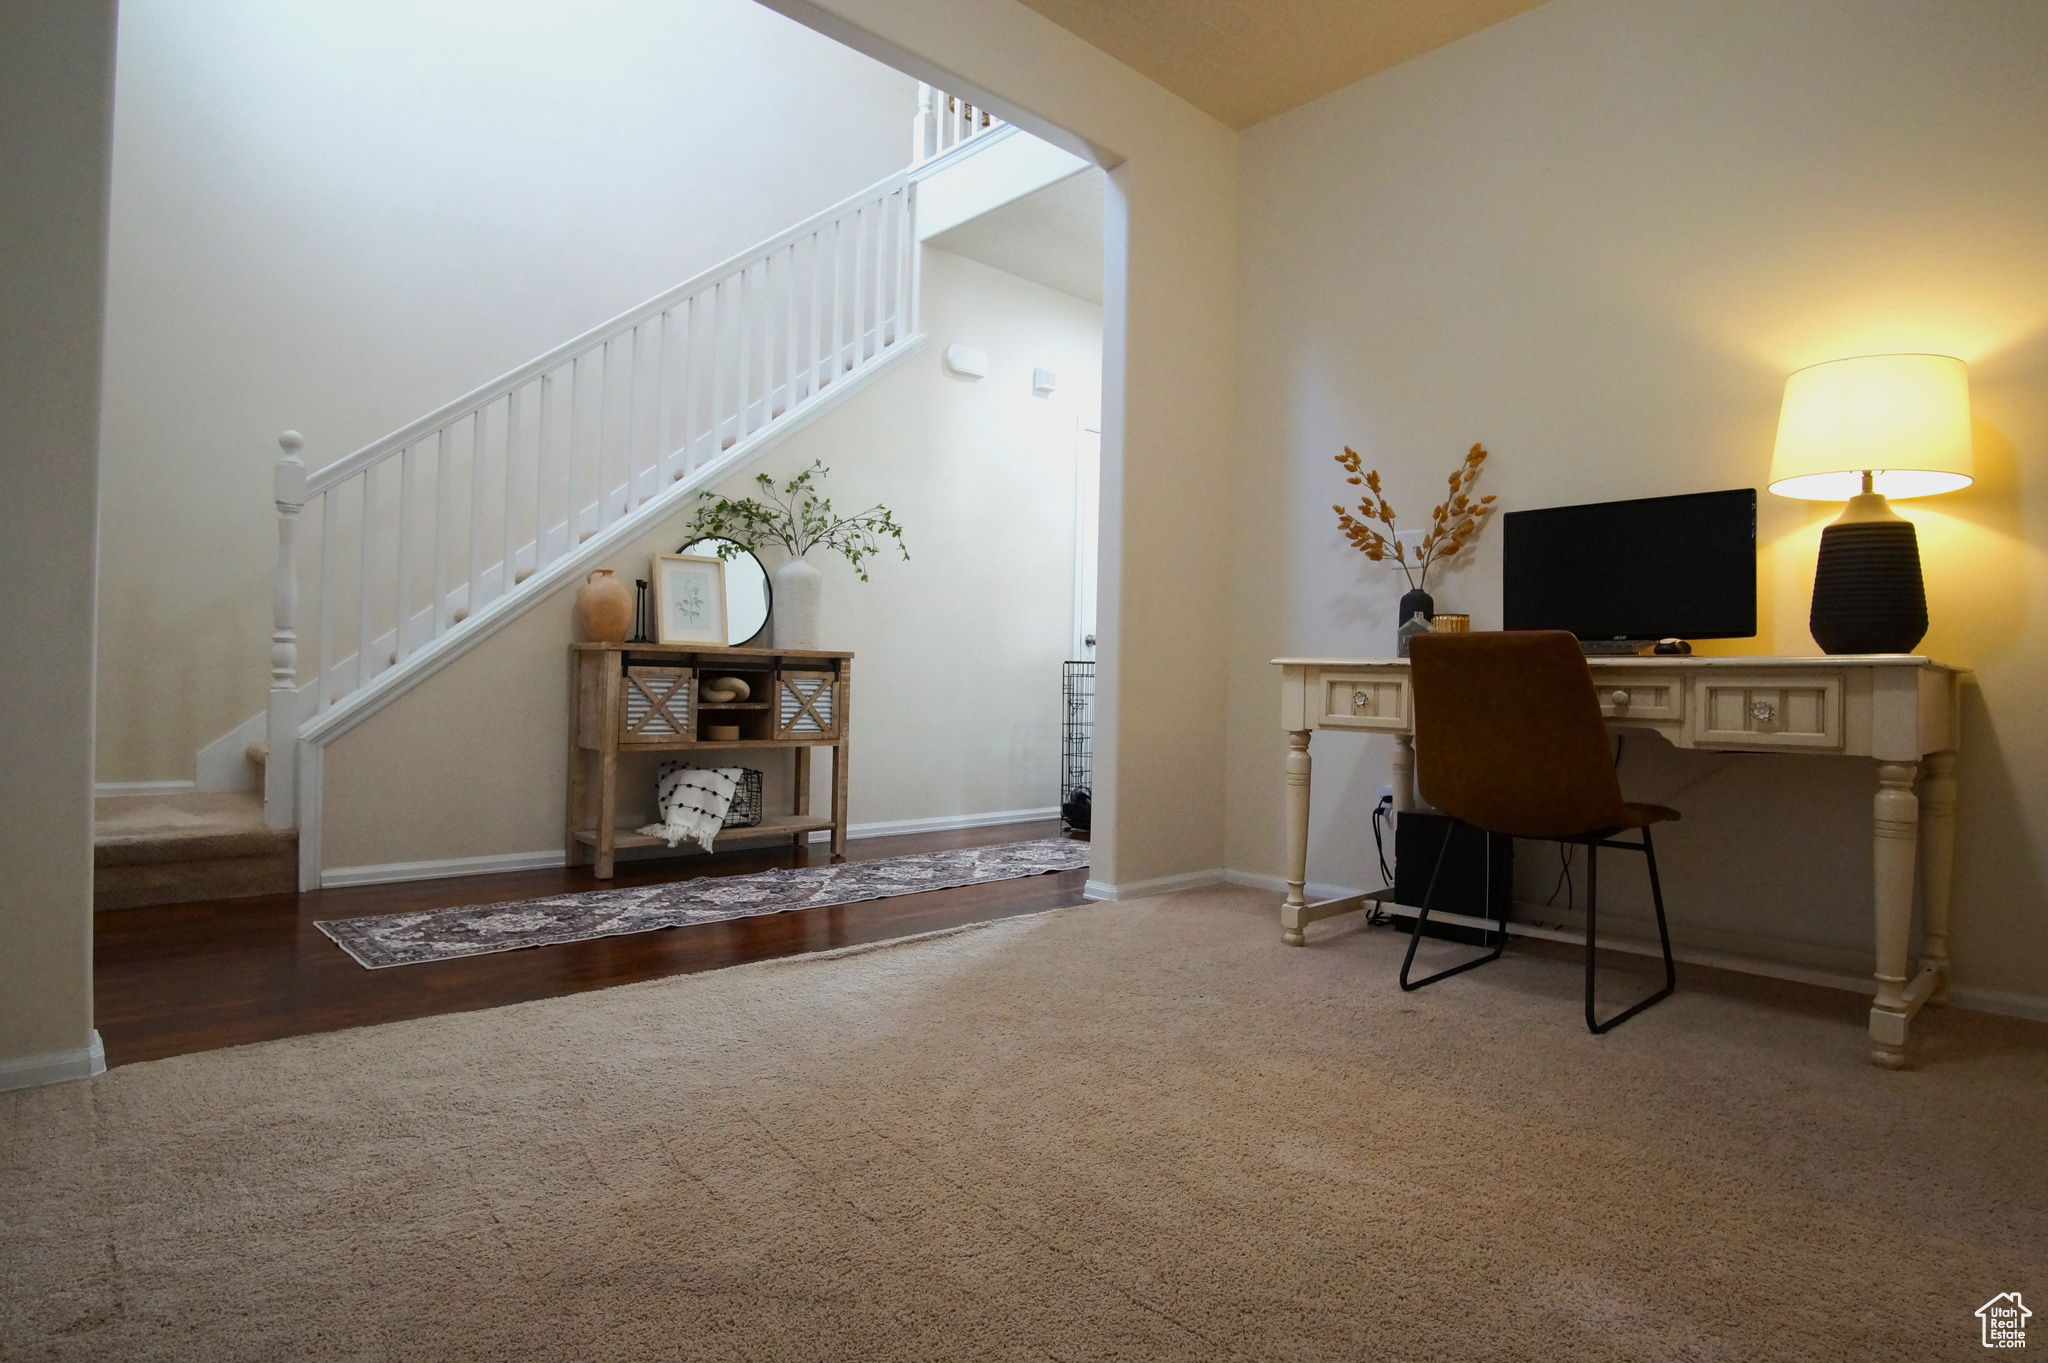 Home Office / Den / Formal Living Room as You Walk into the Home